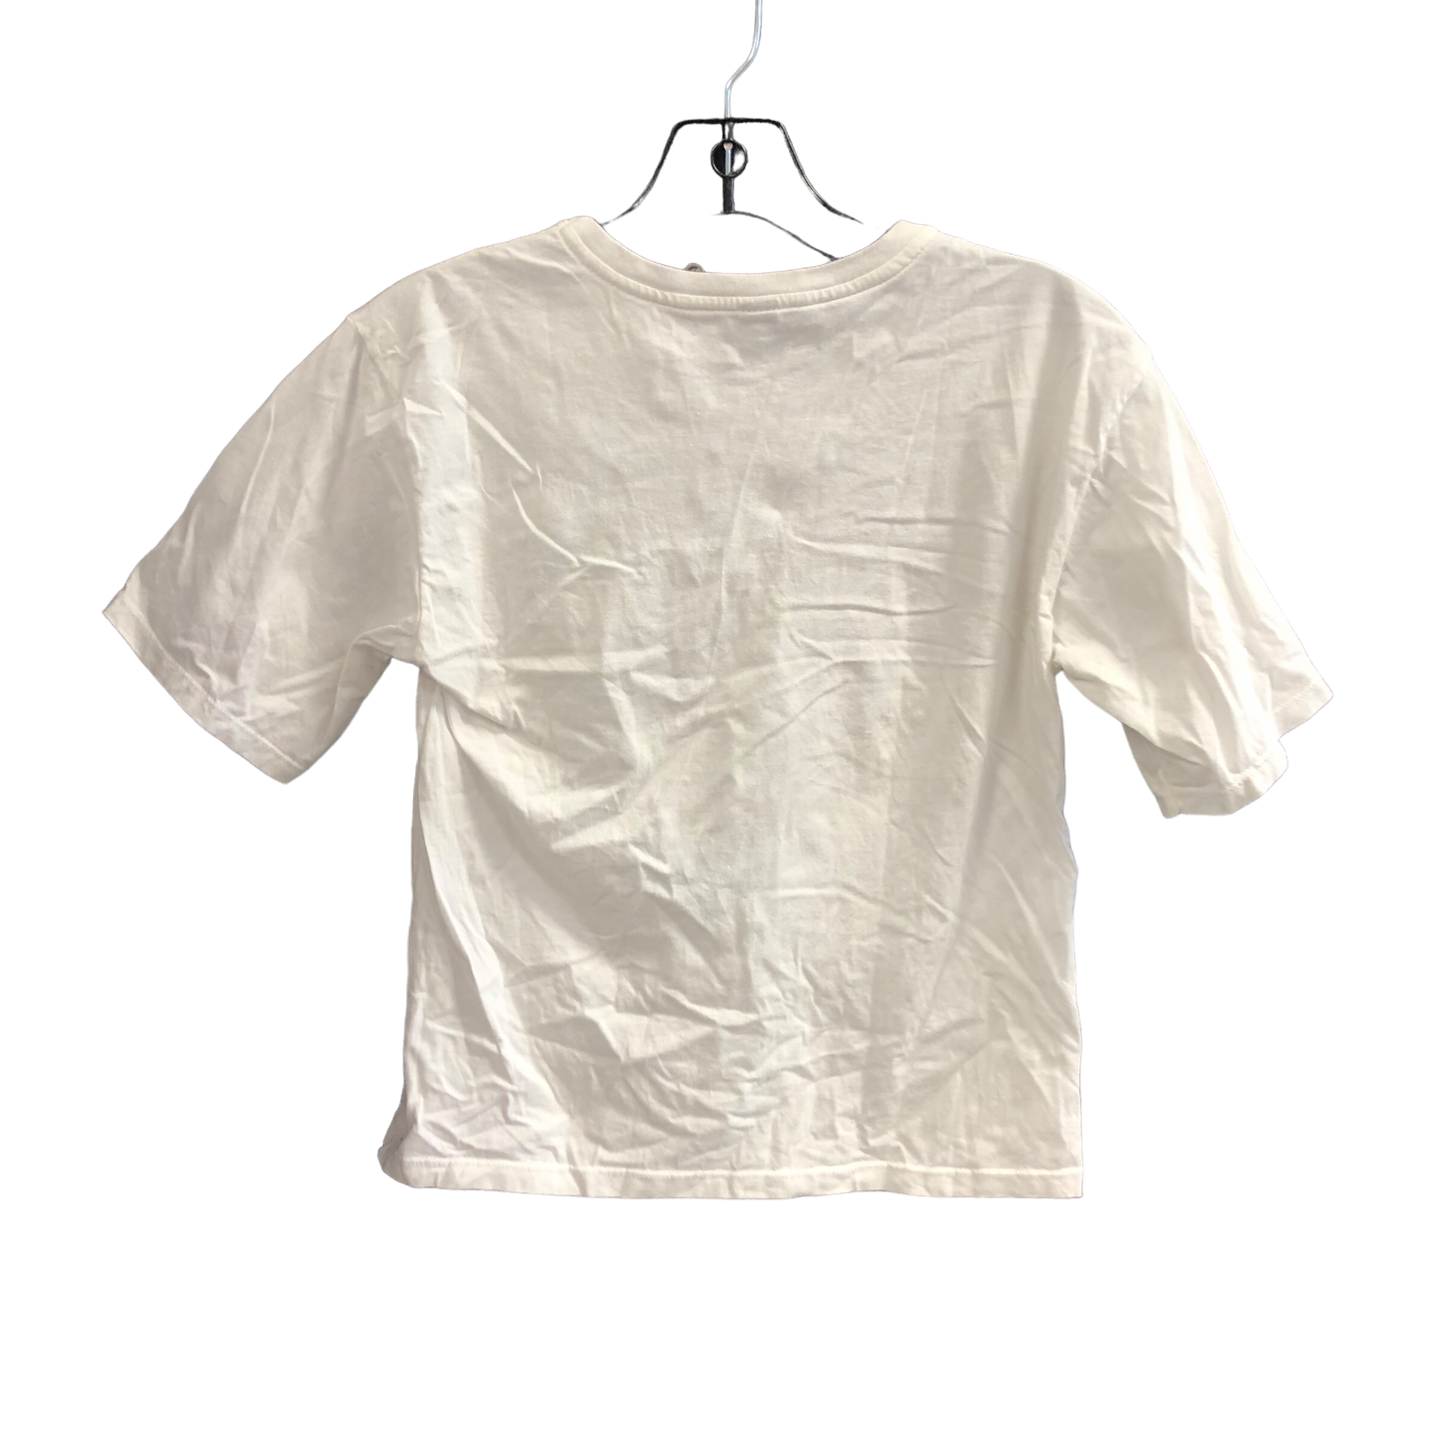 White Top Short Sleeve Cmc, Size S